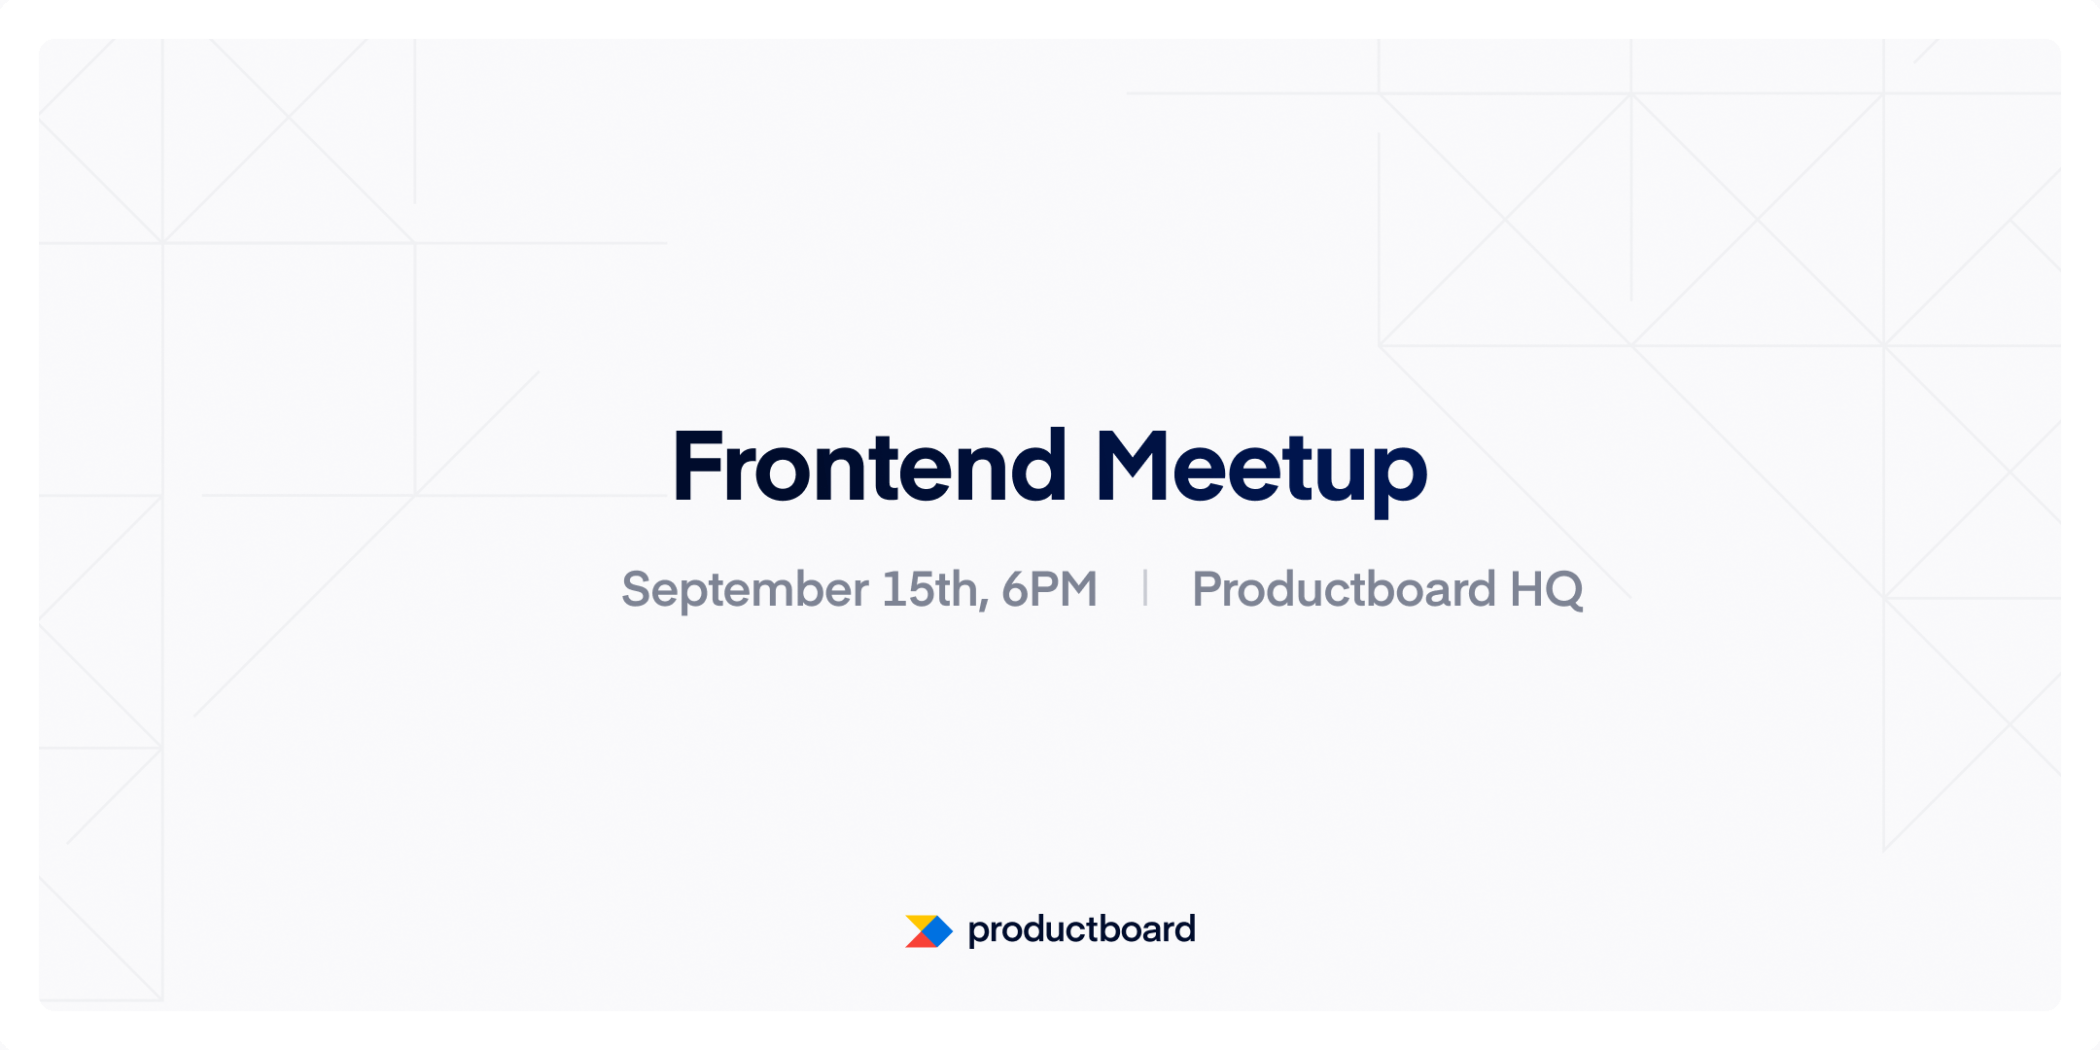 Frontend Meetup PRG